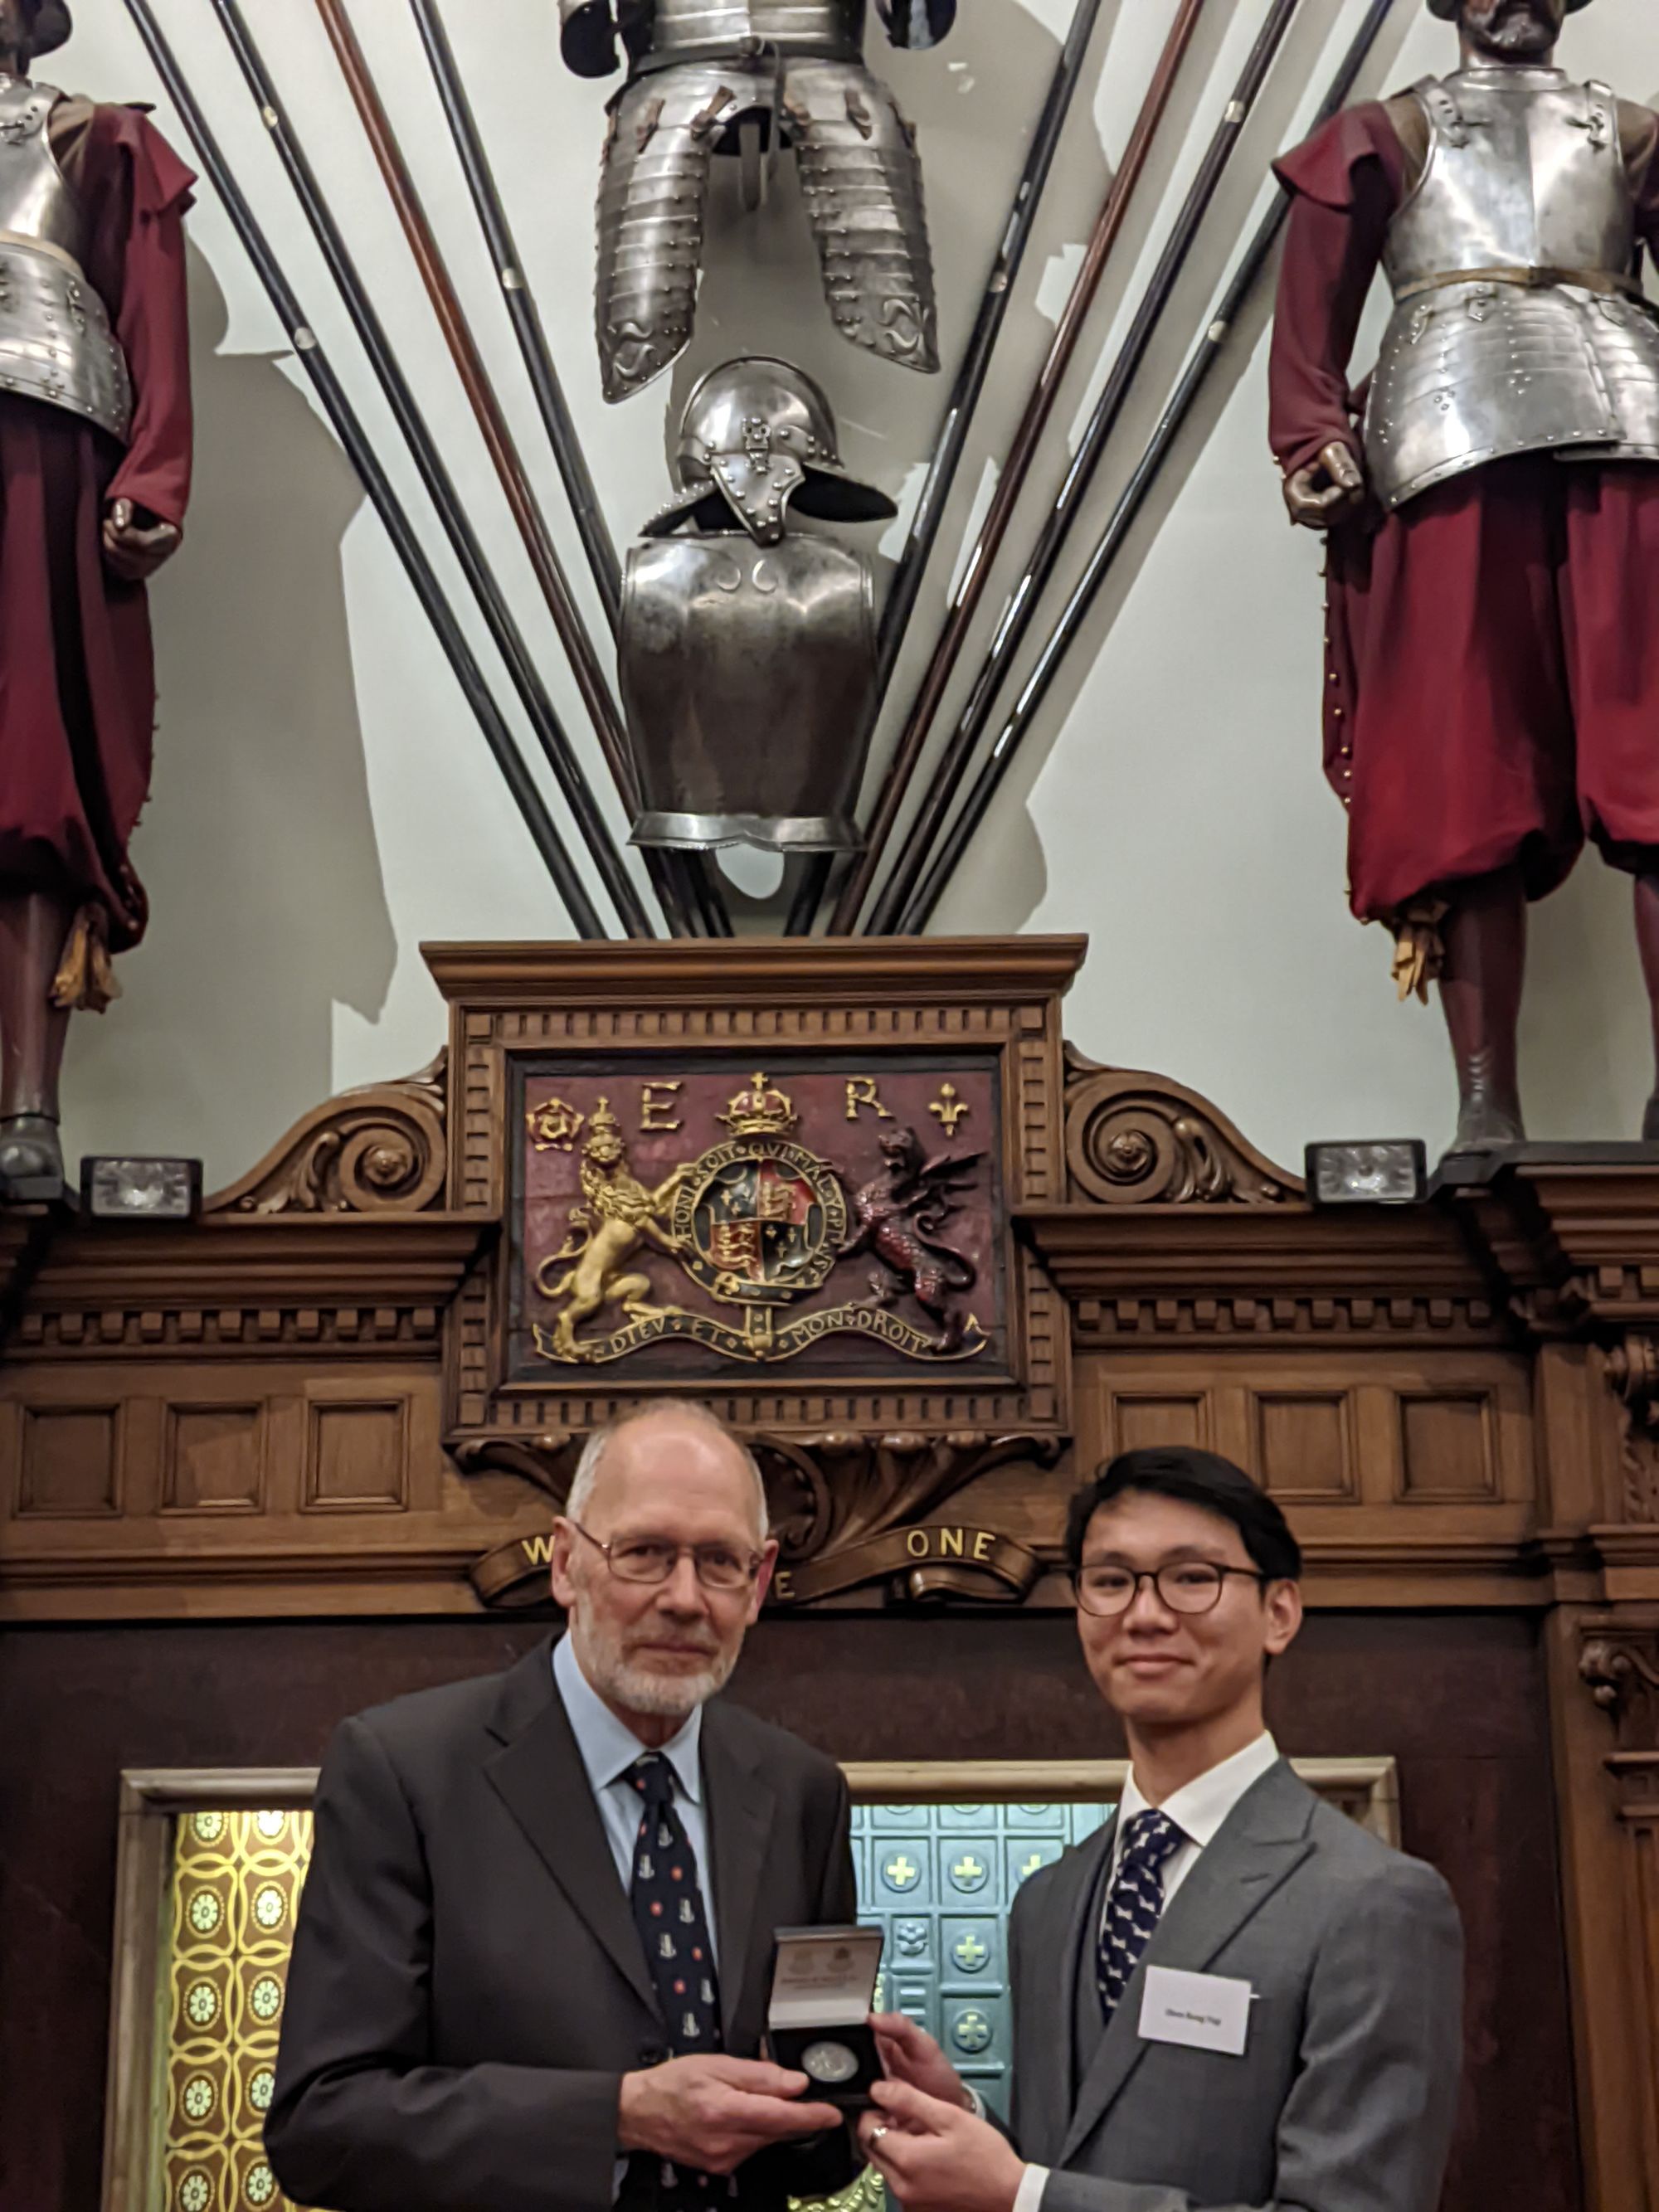 Experience at the Armourers' Hall